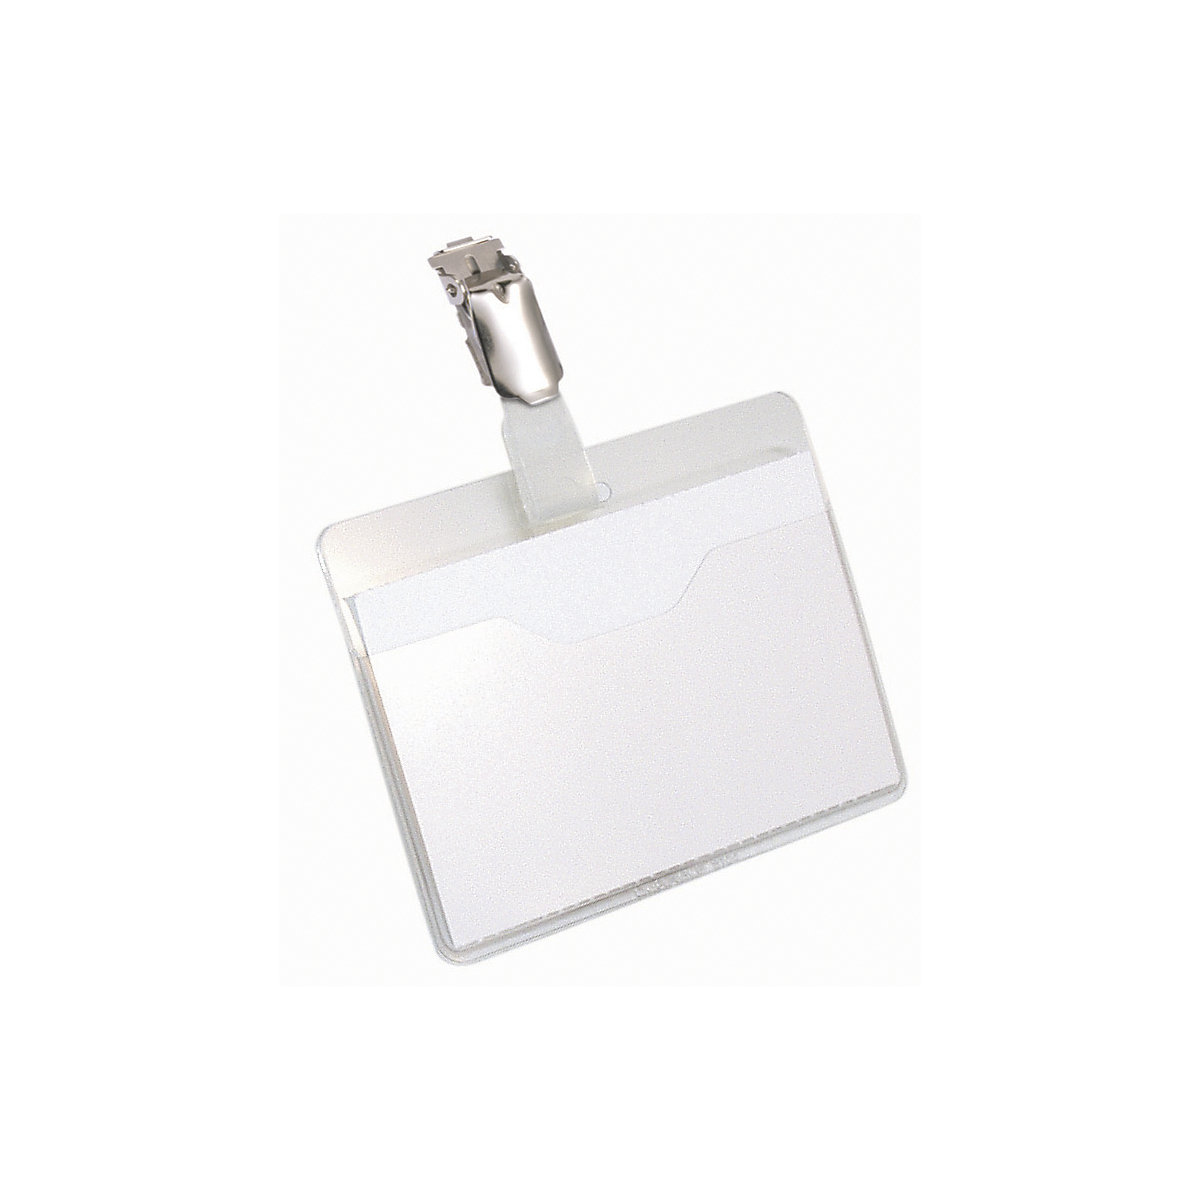 Name badges with clip fastener - DURABLE